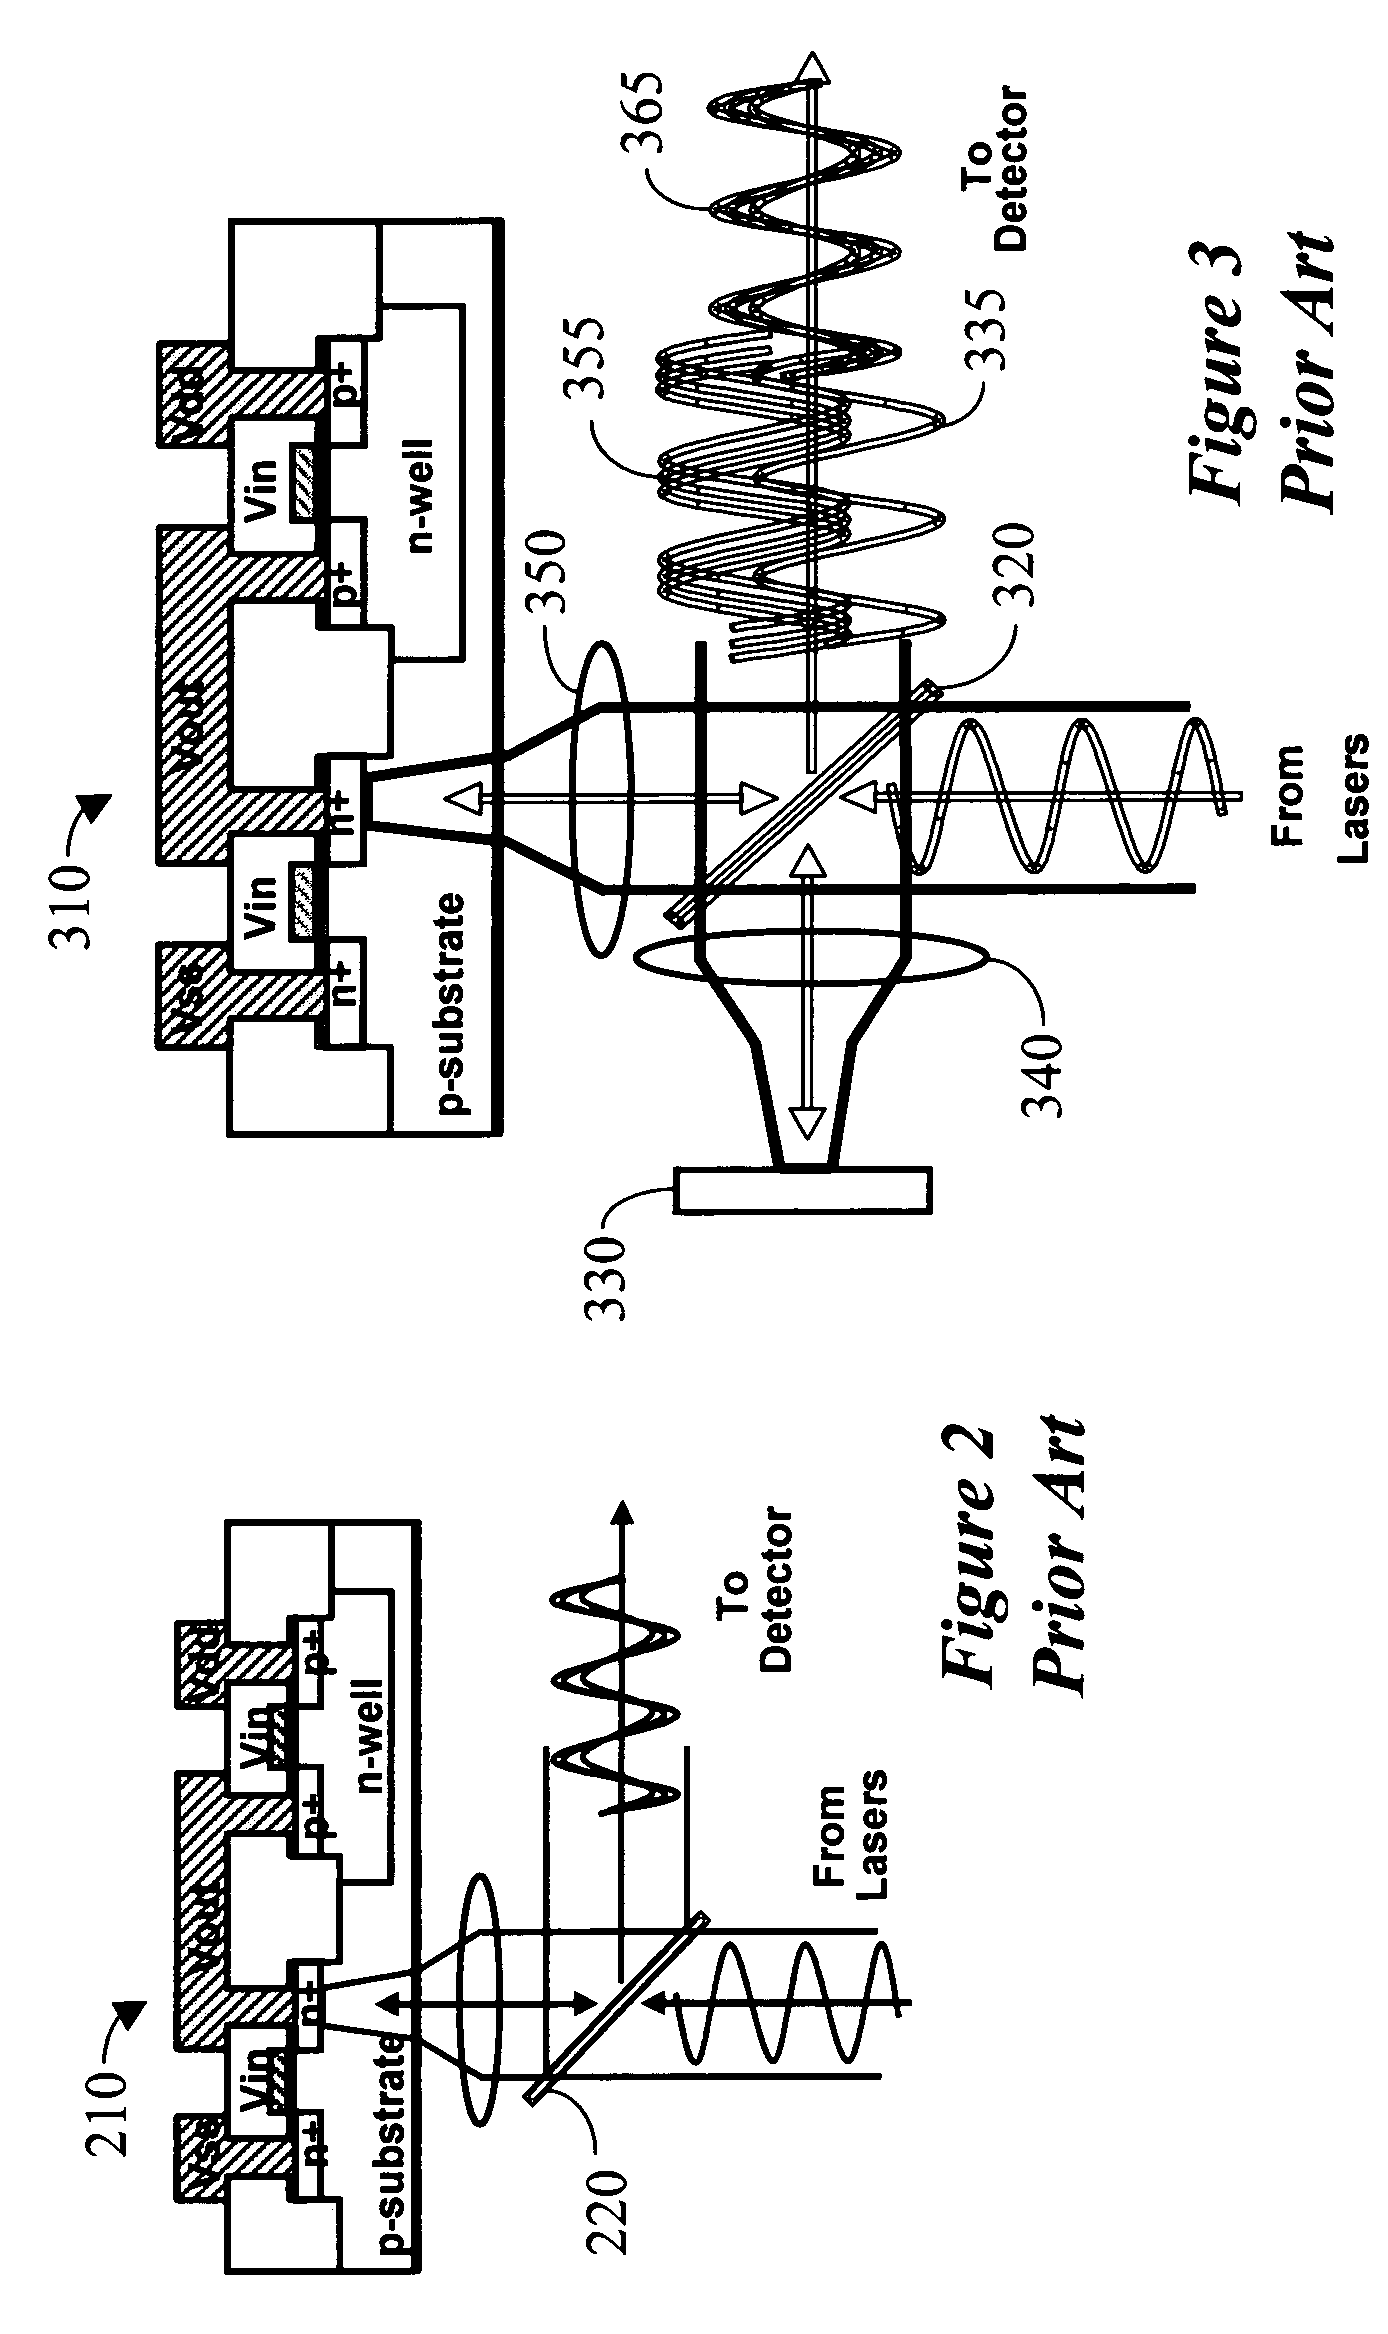 Apparatus and method for probing integrated circuits using laser illumination